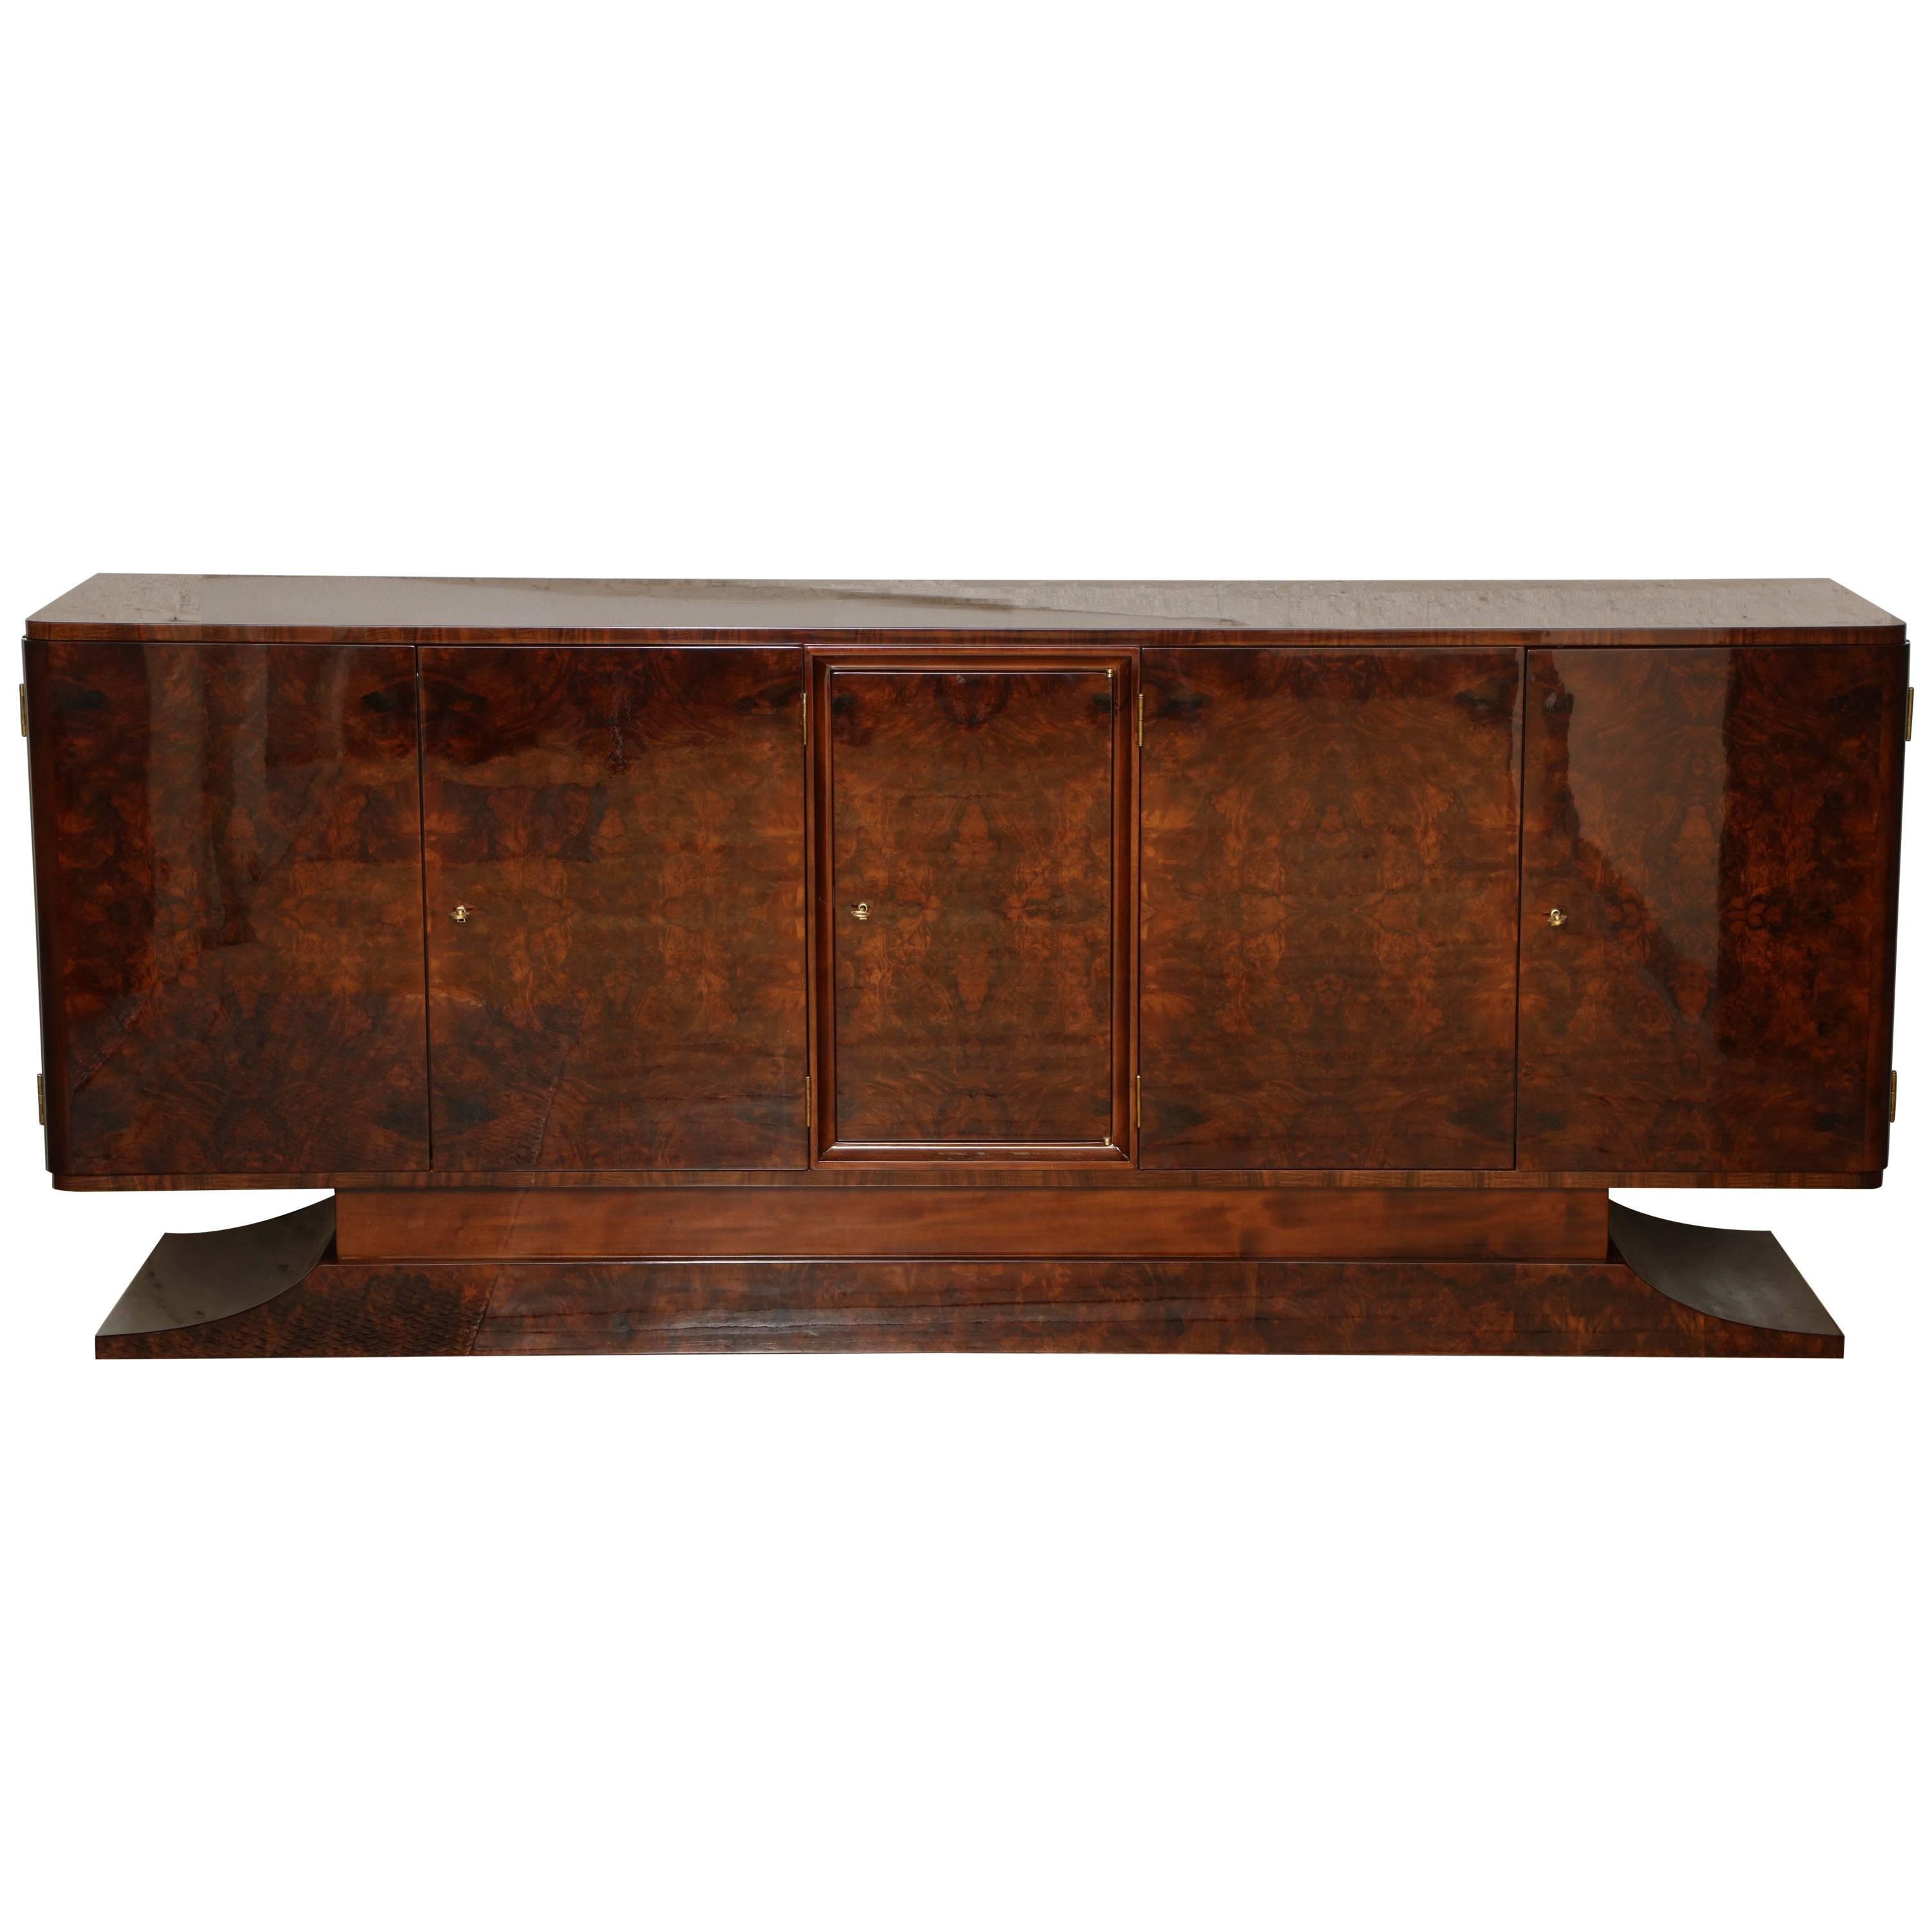  Large French Art Deco Sideboard circa 1930s